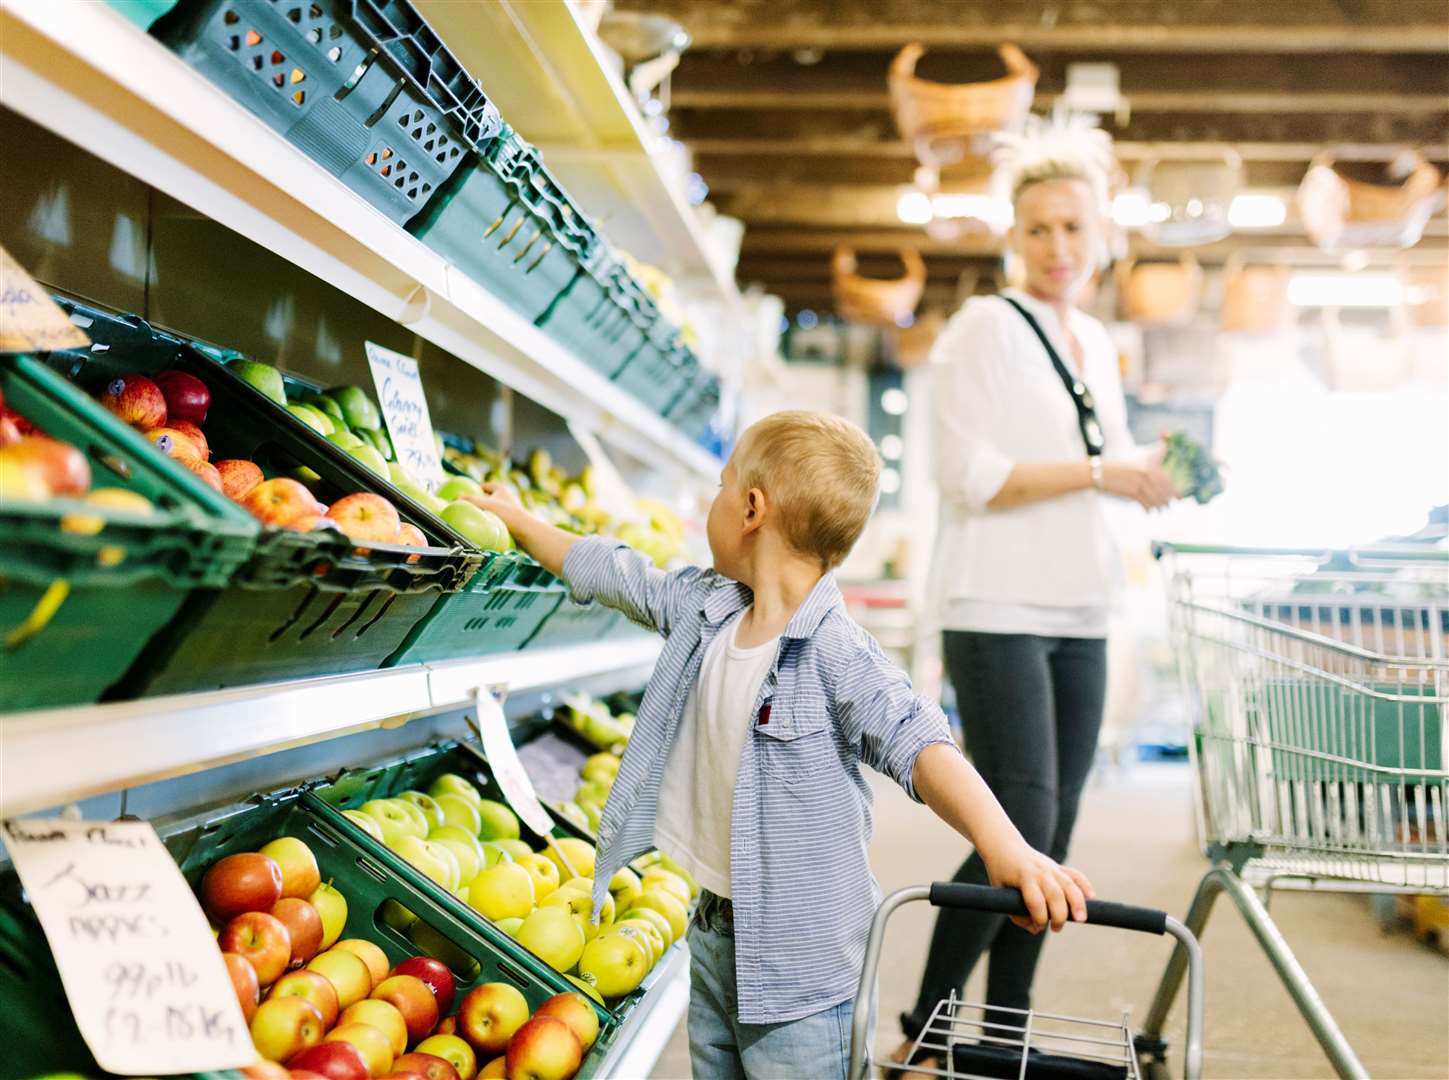 Food vouchers are available to struggling families. Picture: iStock